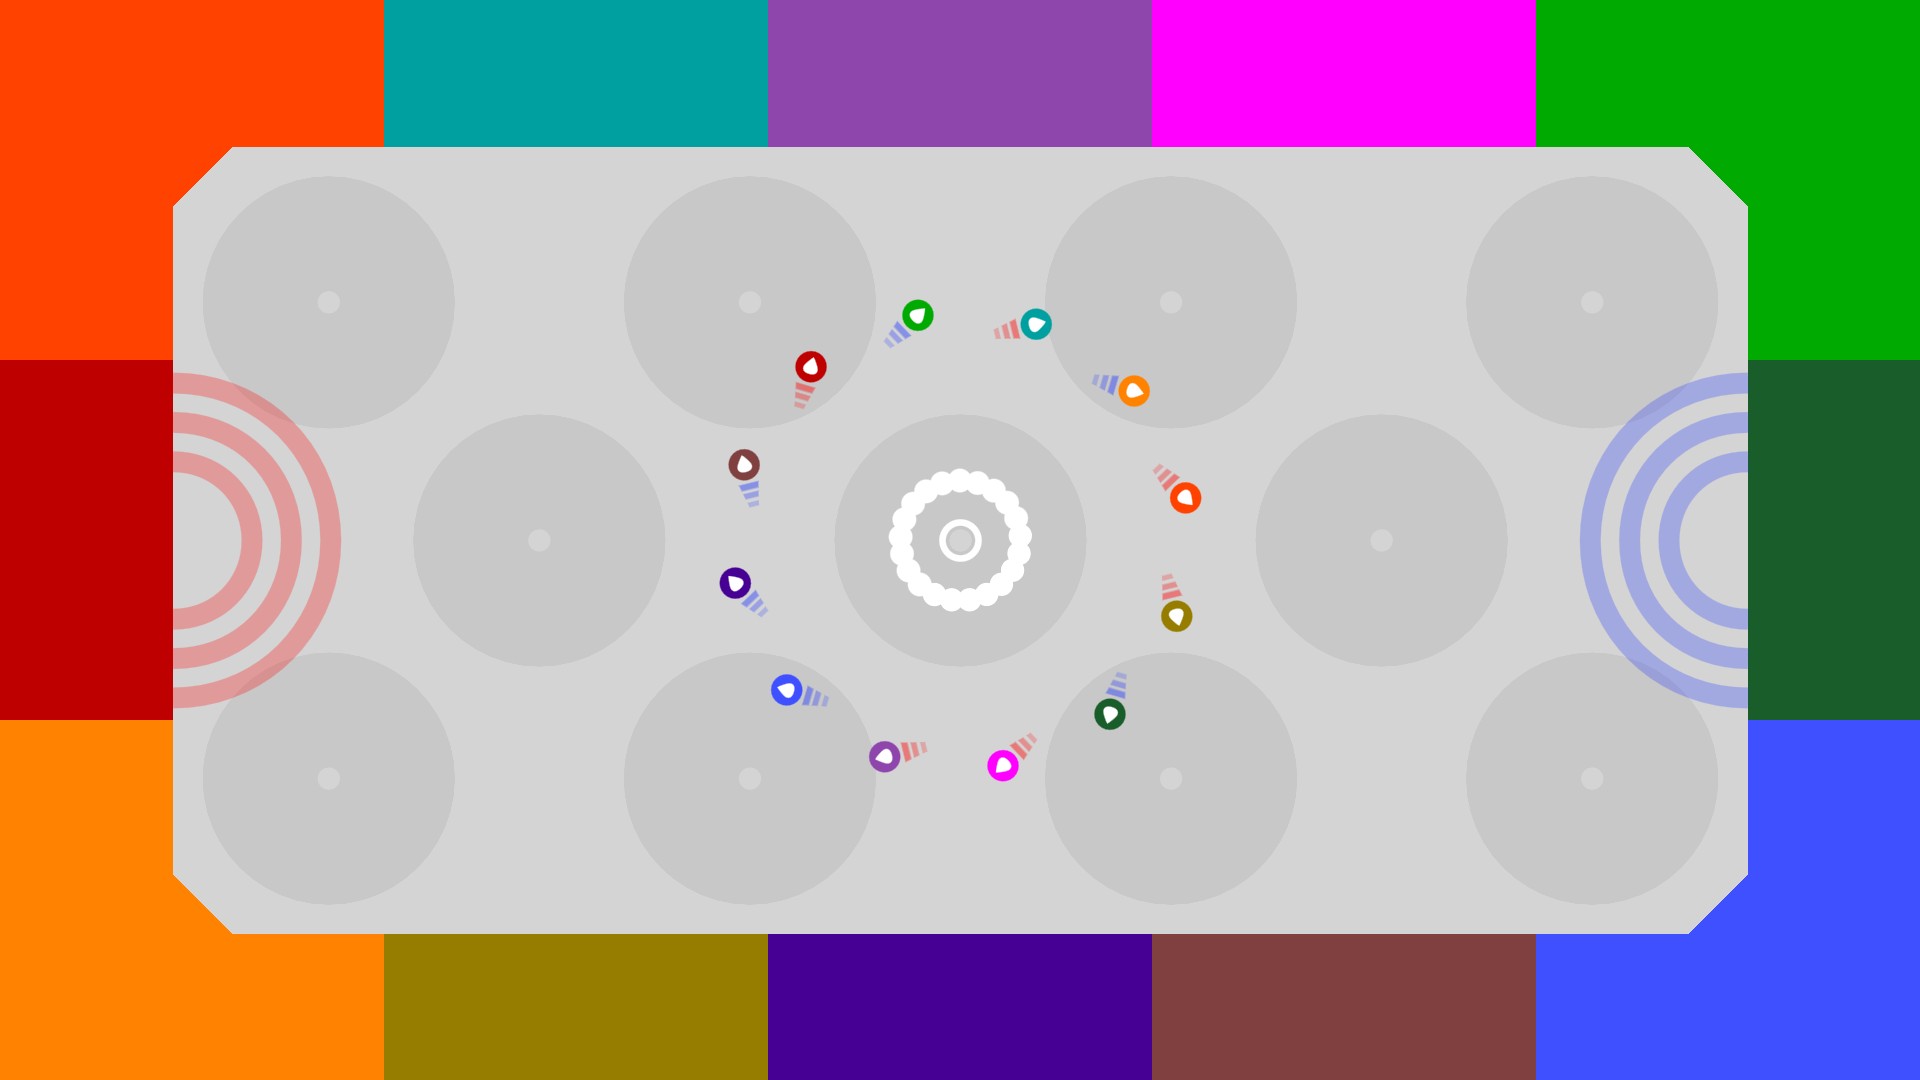 12 orbits • local multiplayer for 2, 3, 4, 5, 6... 12 players